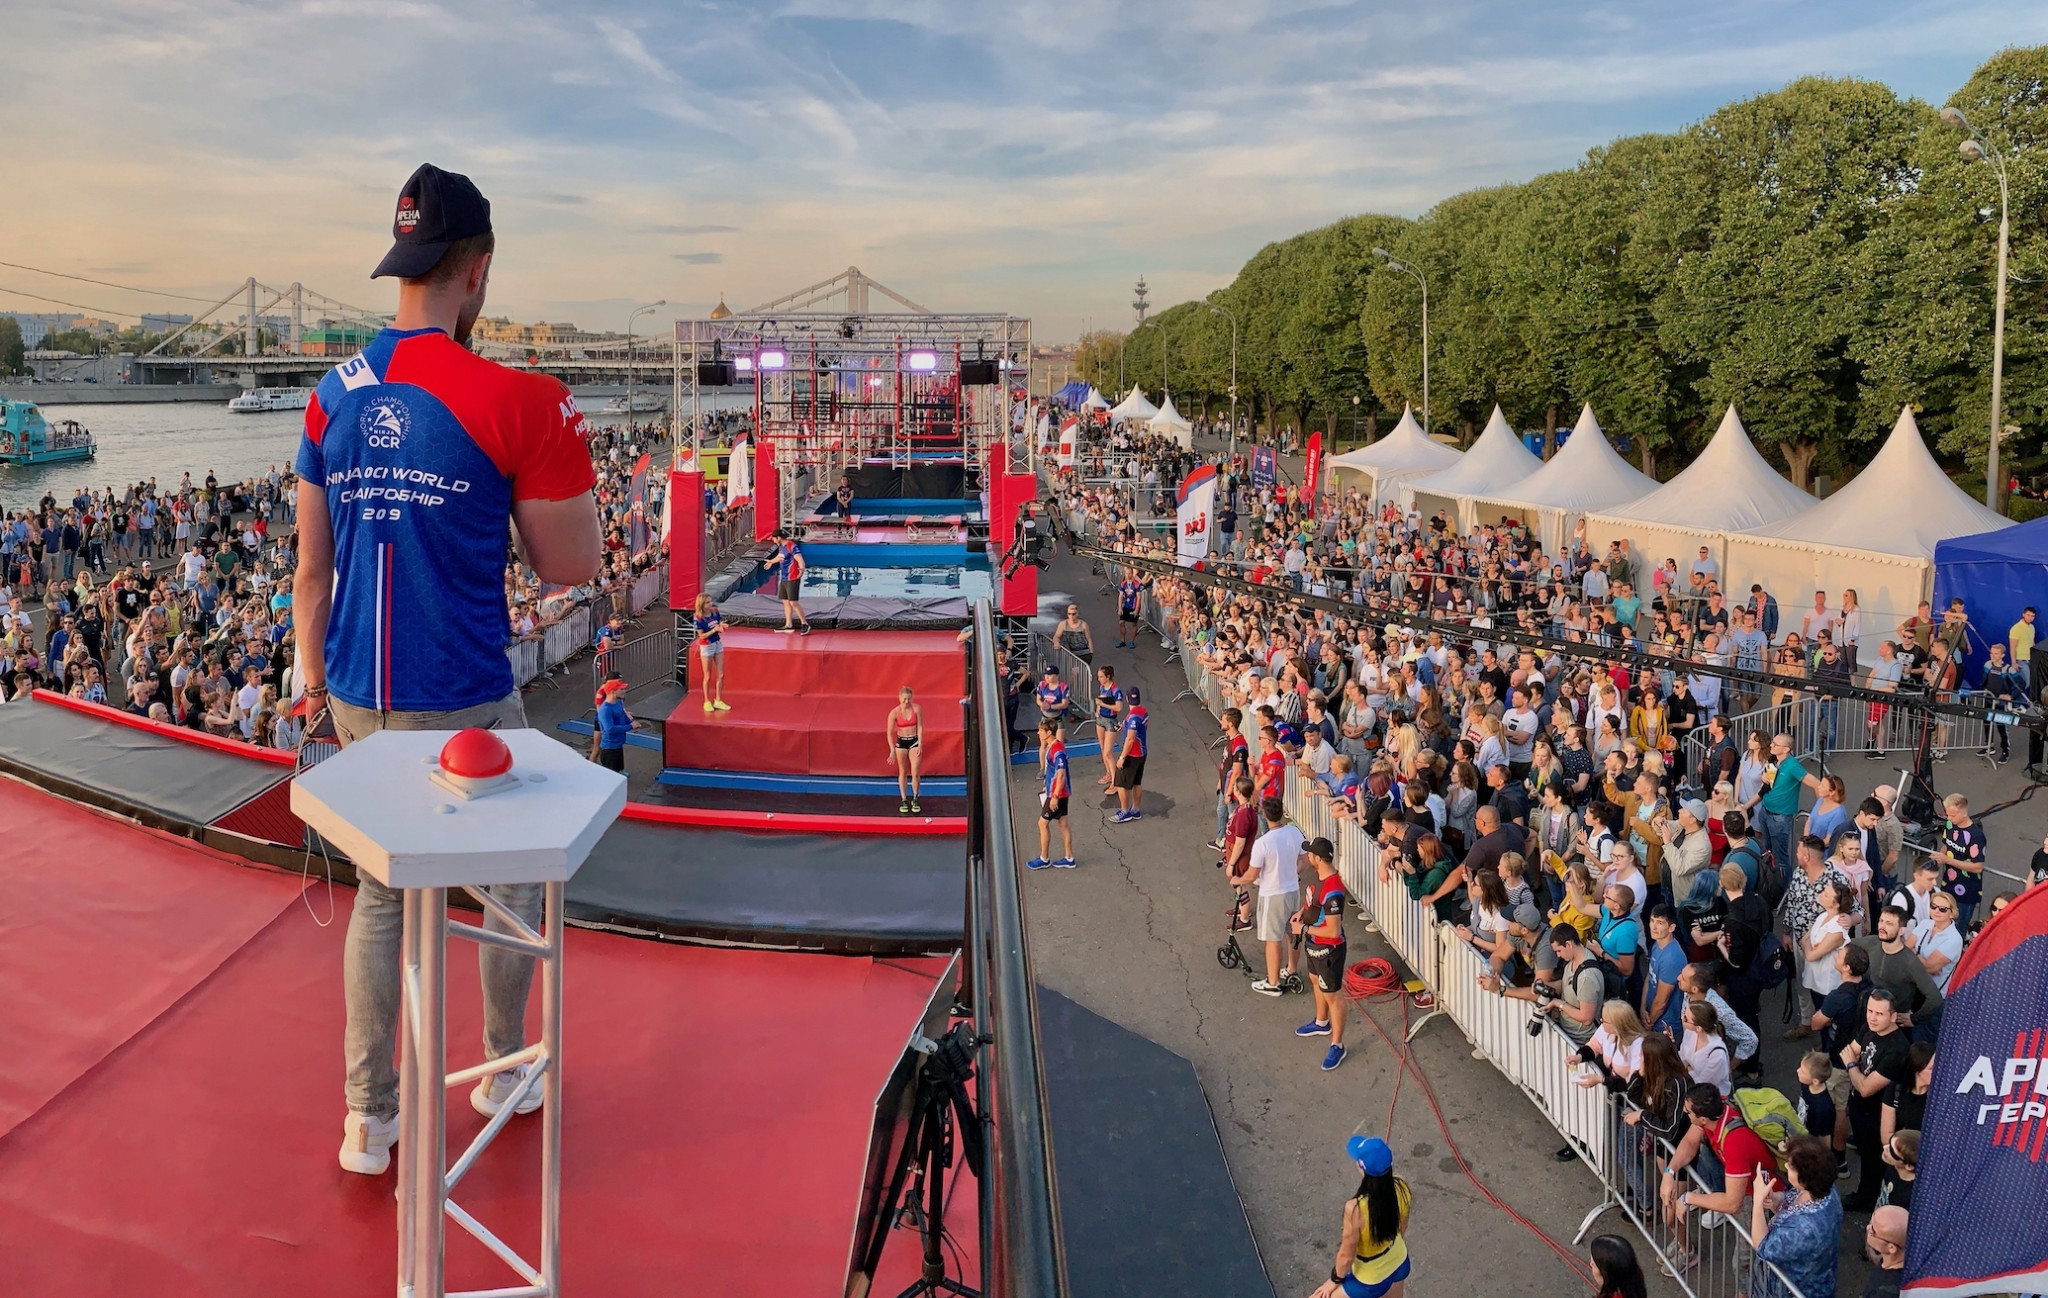 A view of the course used during the 2019 Ninja World Championships in Russia ©World Obstacle  